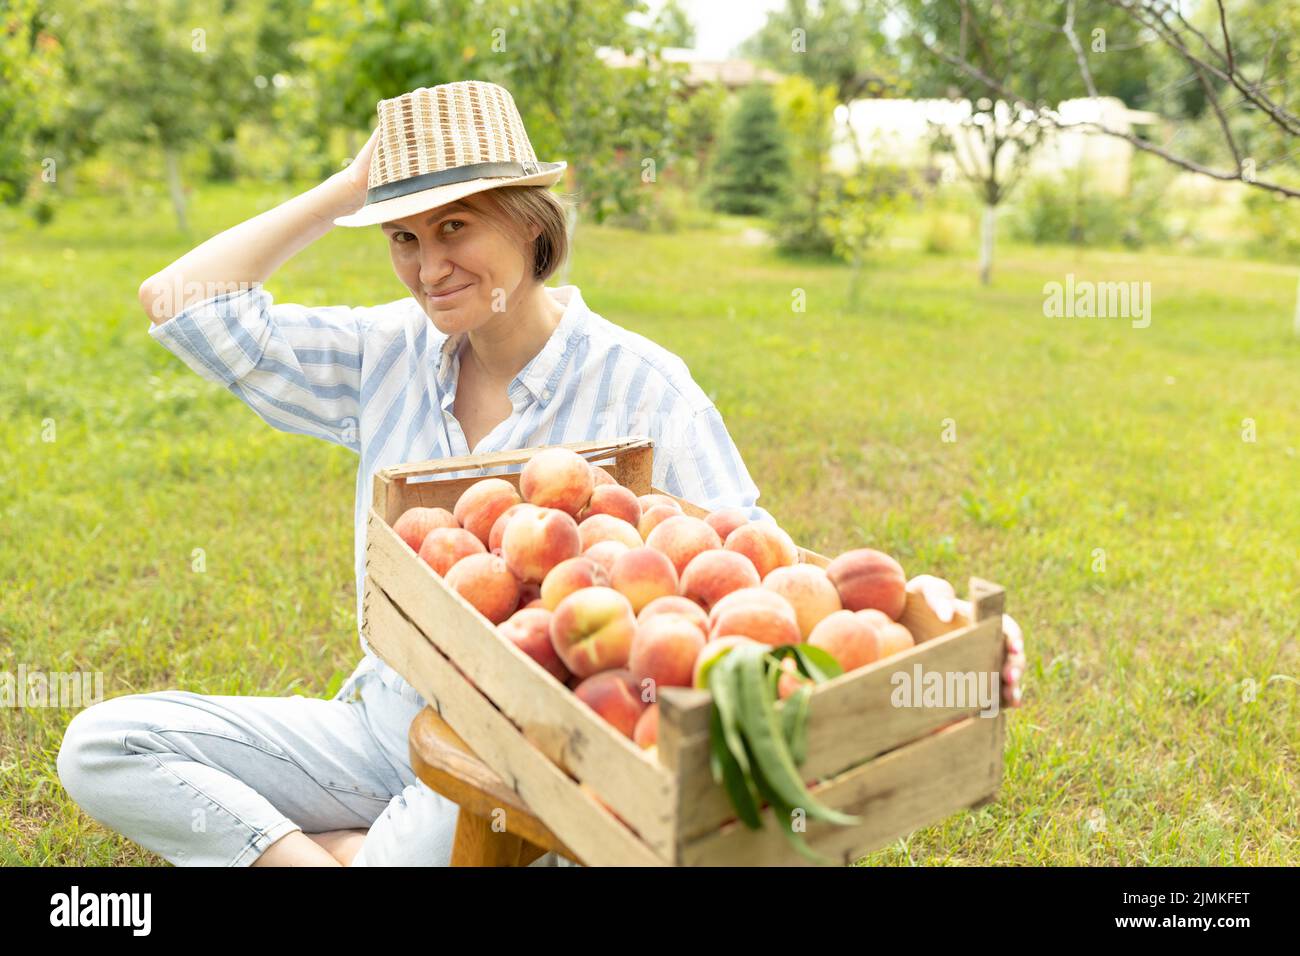 Portrait of smiling woman farmer with wooden box of freshly harvested ripe peaches Stock Photo